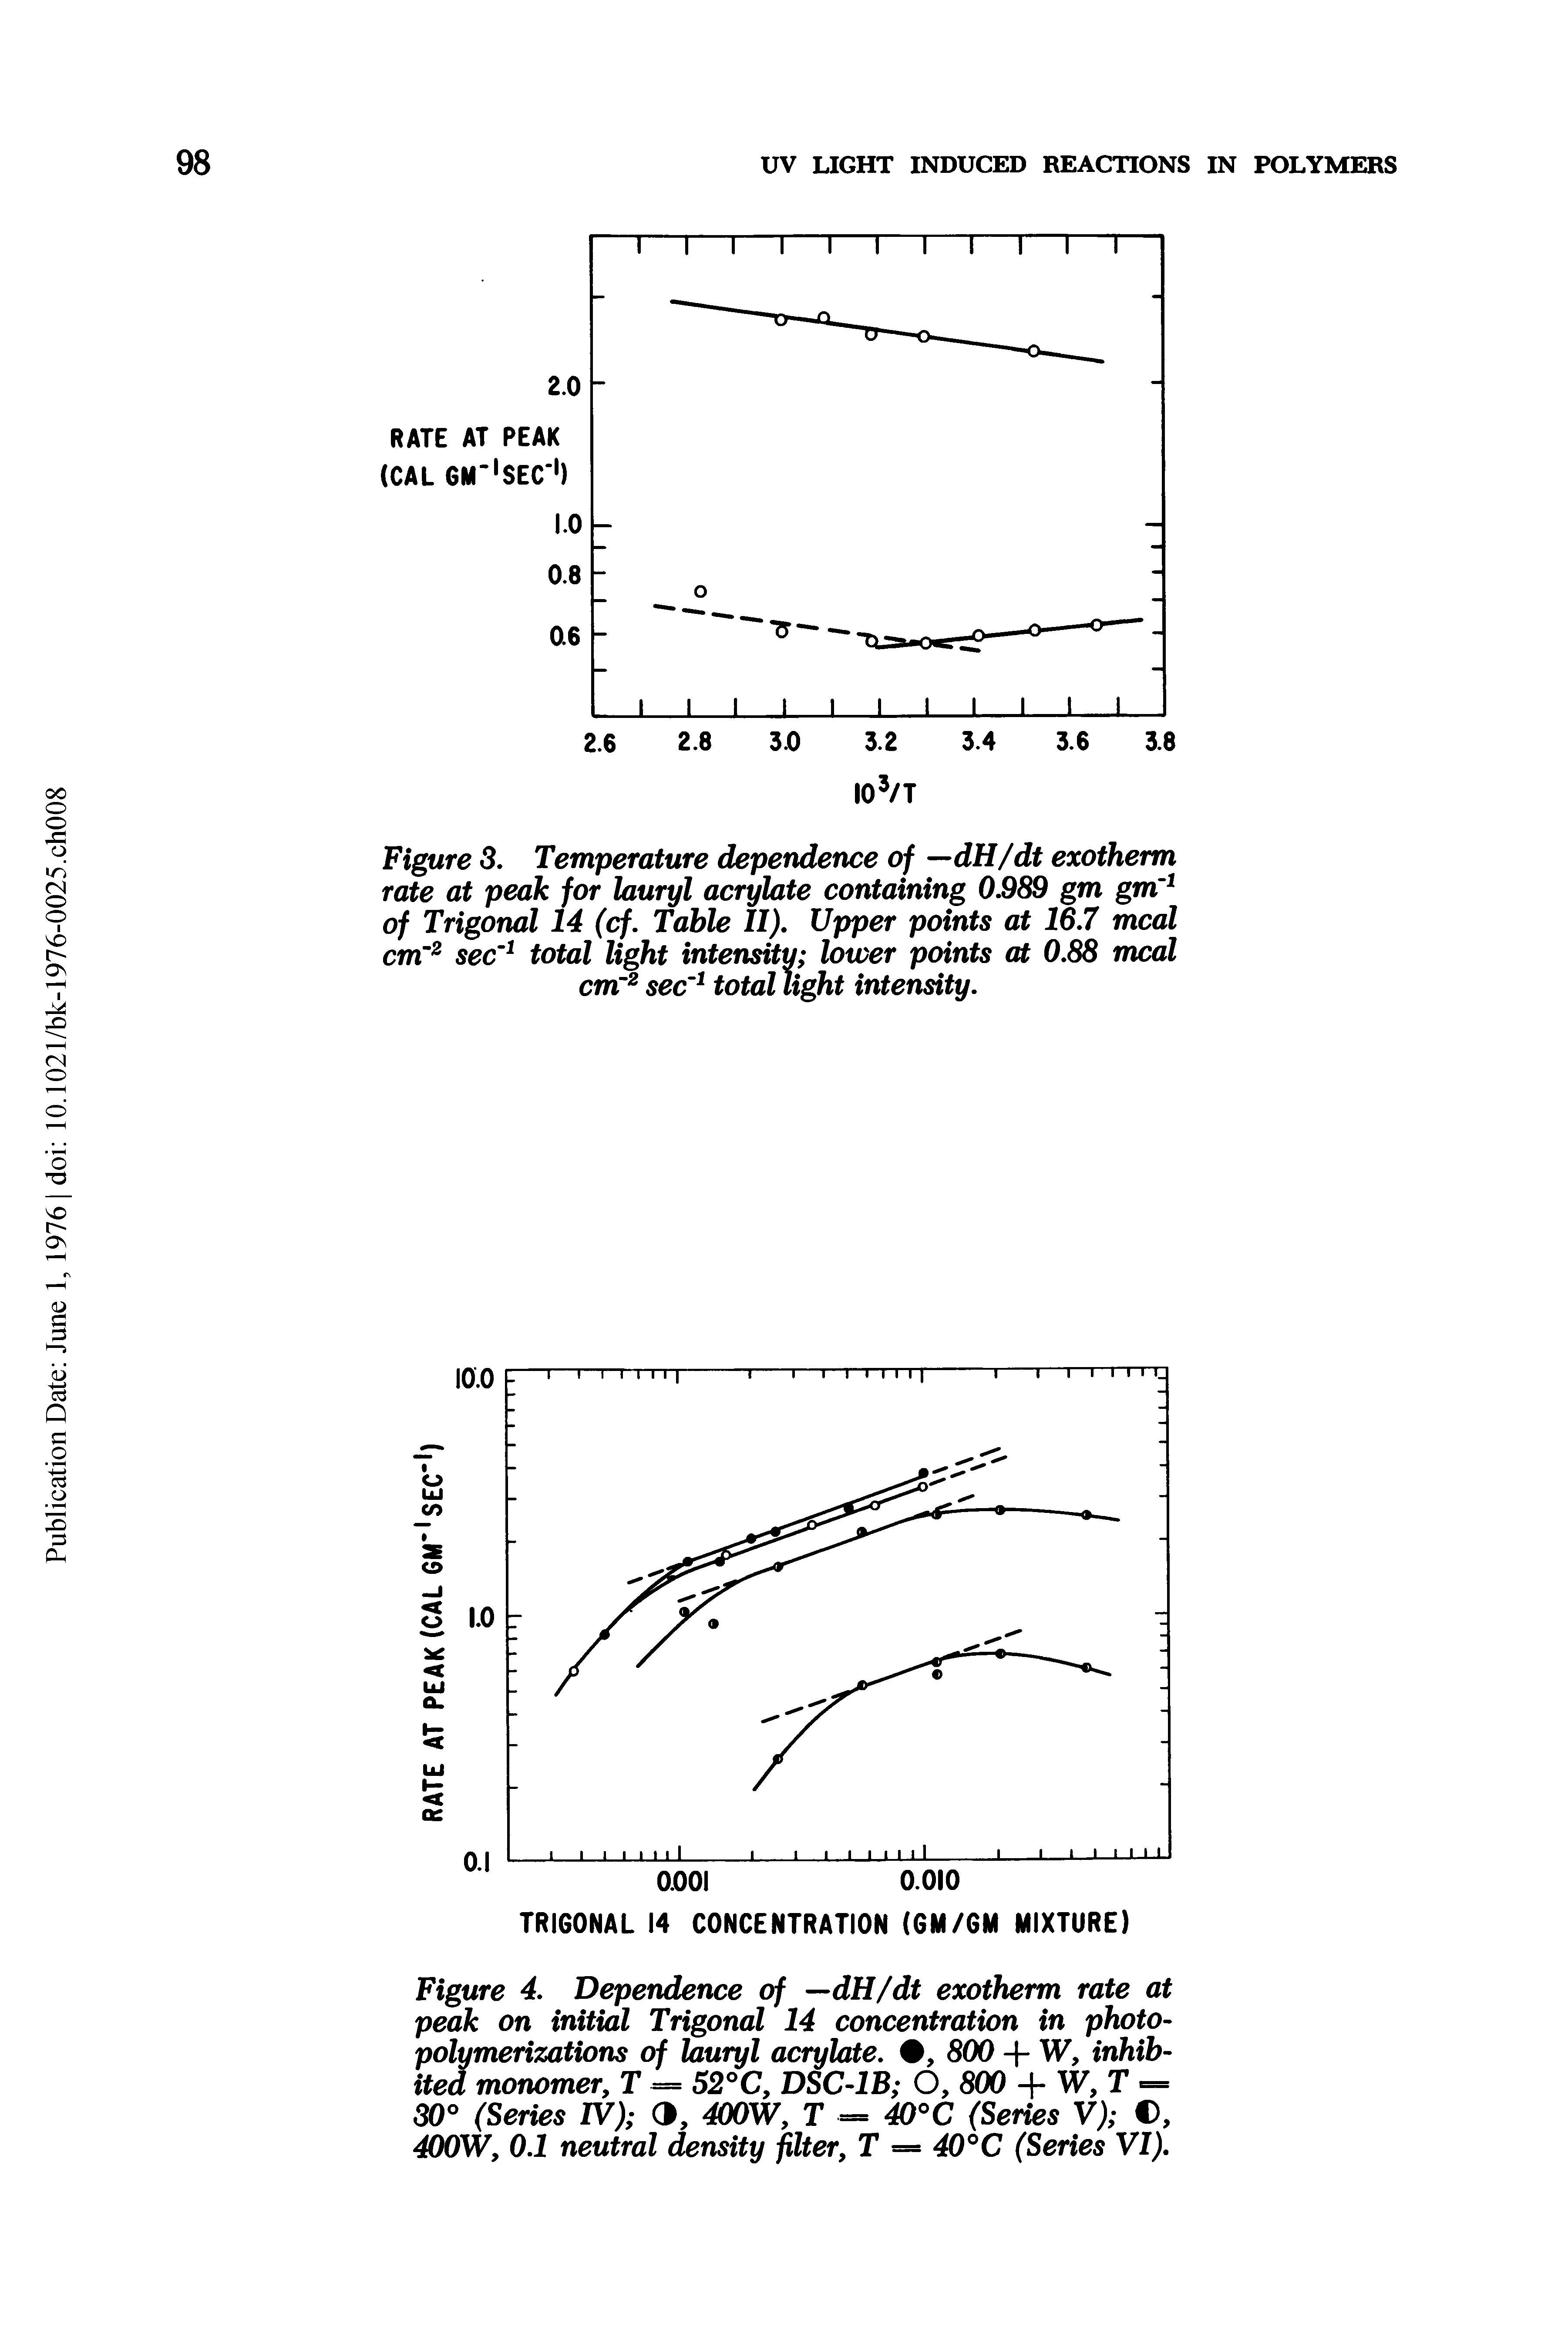 Figure 4. Dependence of —dH/dt exotherm rate at peak on initial Trigonal 14 concentration in photo-polymerizations of lauryl acrylate. , 800 + W, inhibited monomer, T = 52°C, DSC-1B O, 800 + W, T = 30° (Series IV) 3, 400W, T — 40°C (Series V) , 400W, 0.1 neutral density filter, T = 40°C (Series VI).